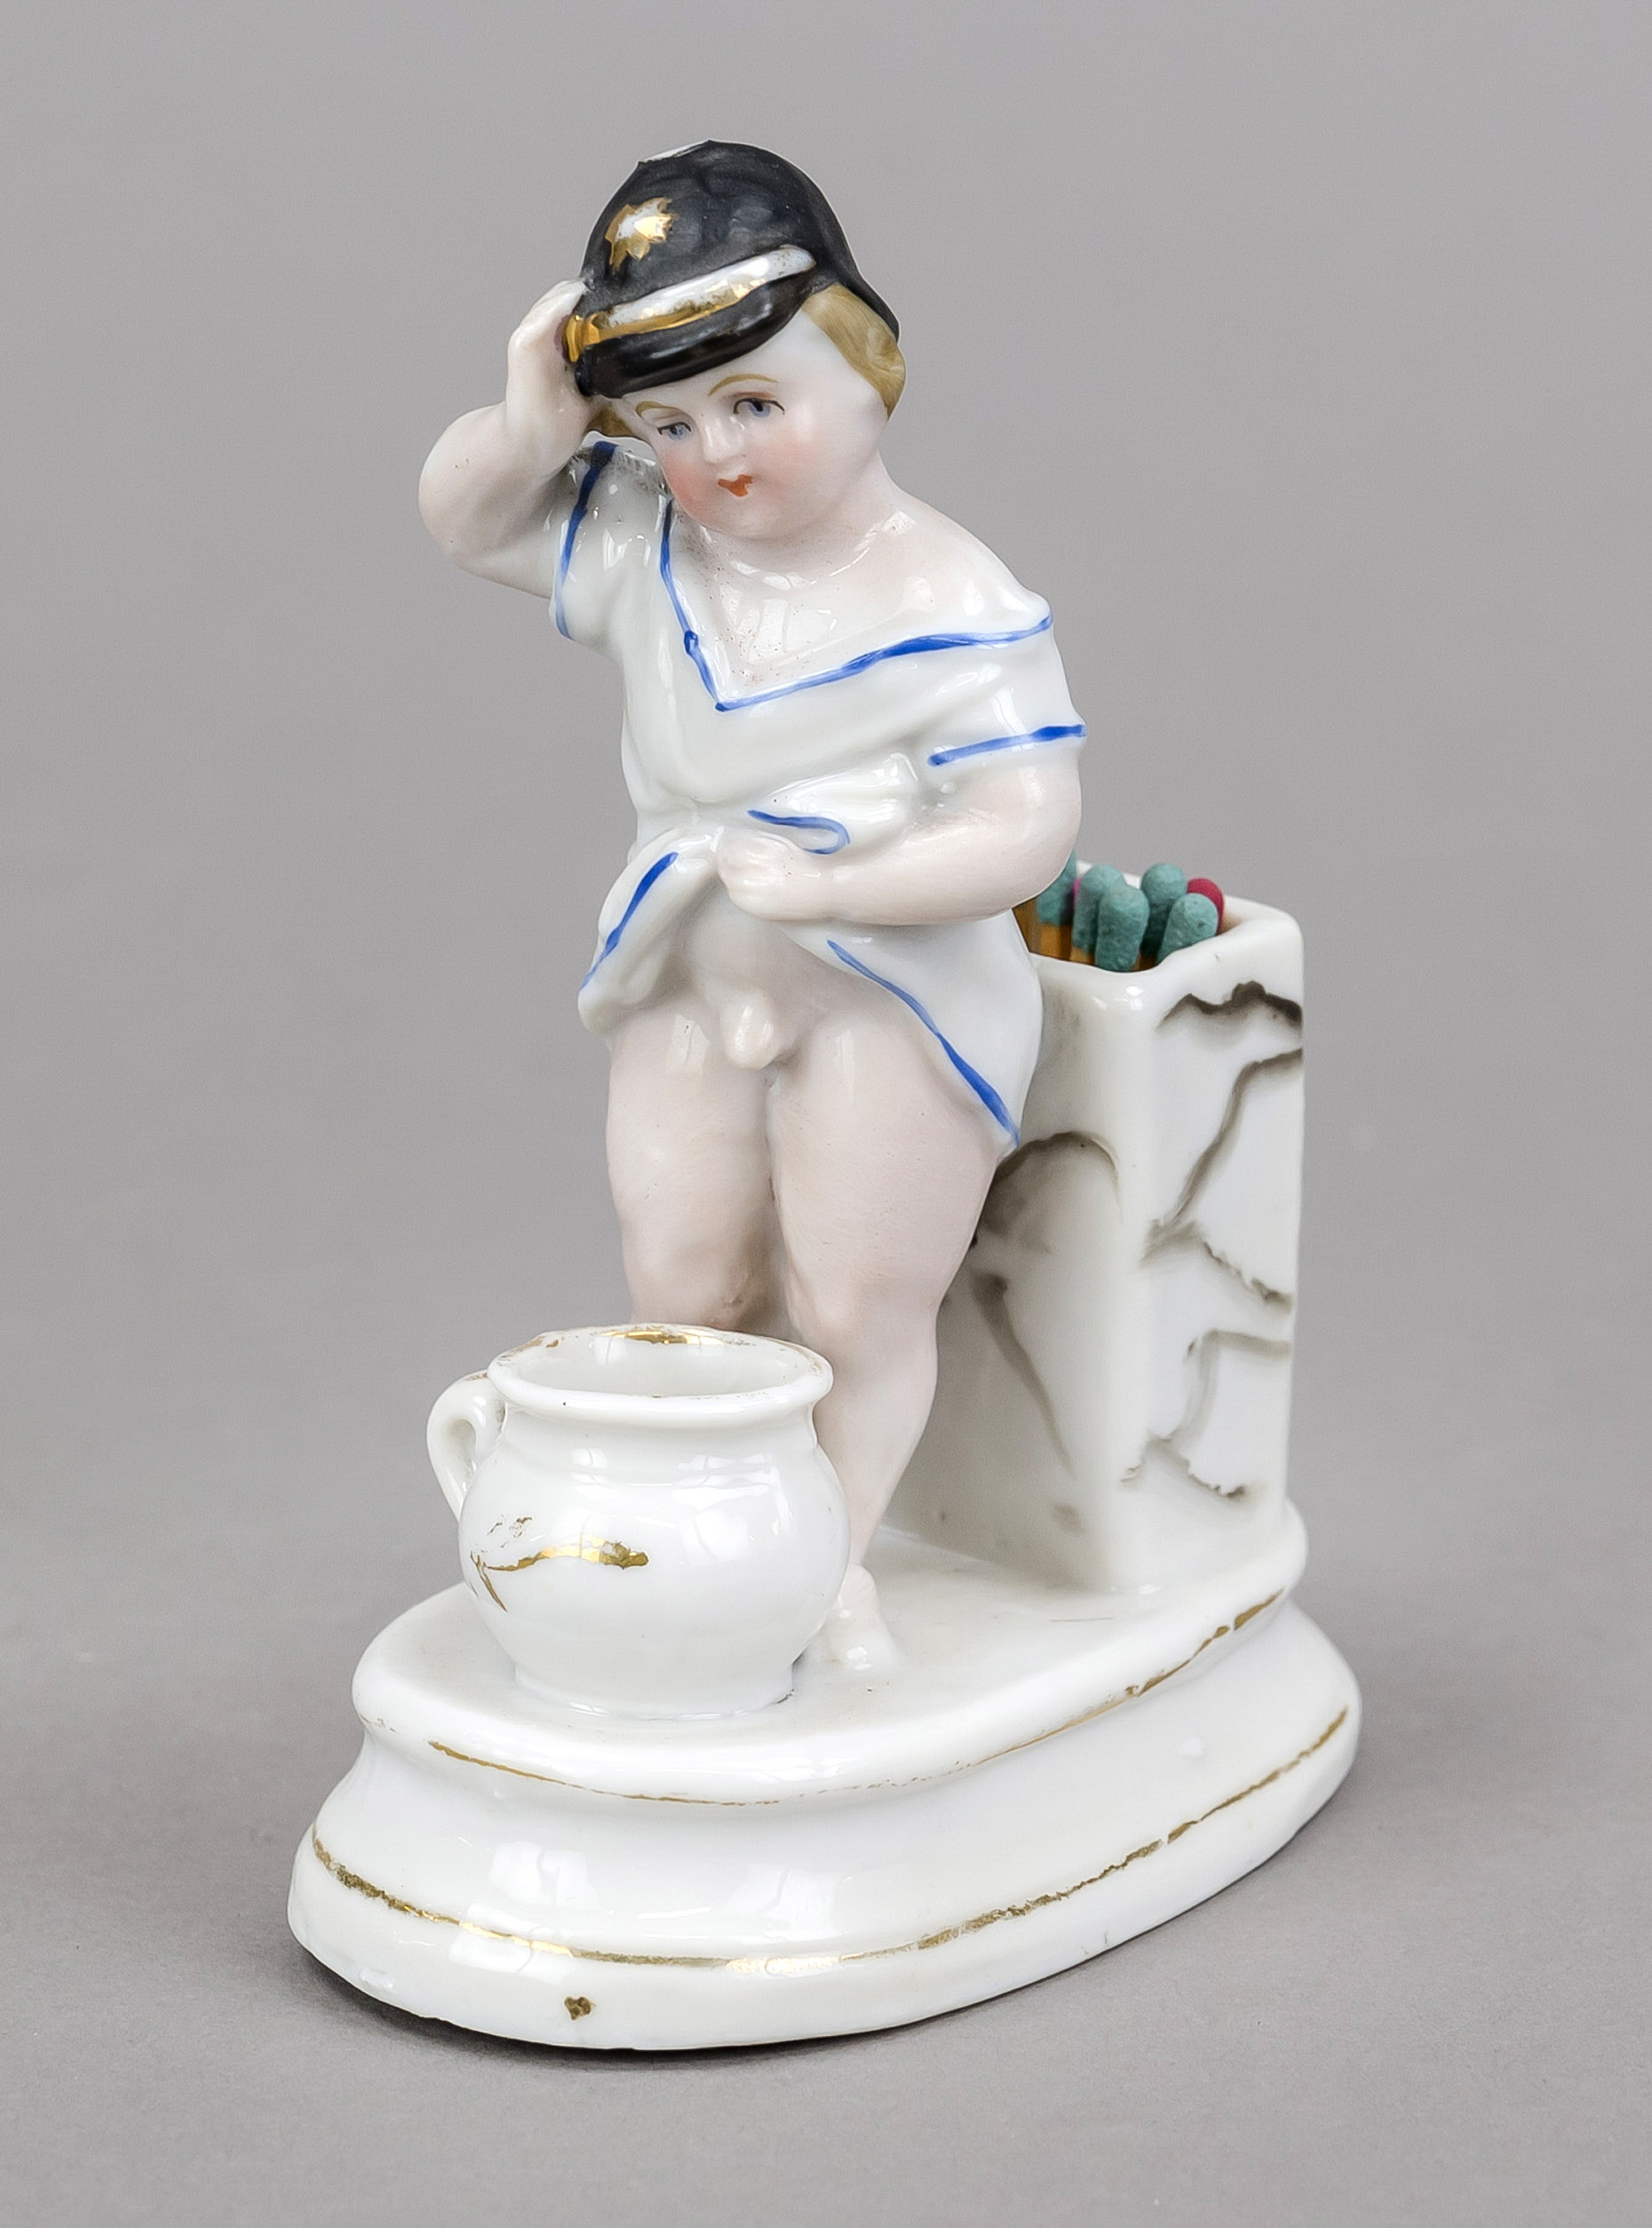 Humorous match holder, late 19th century, polychrome painted and glazed porcelain. A young boy in